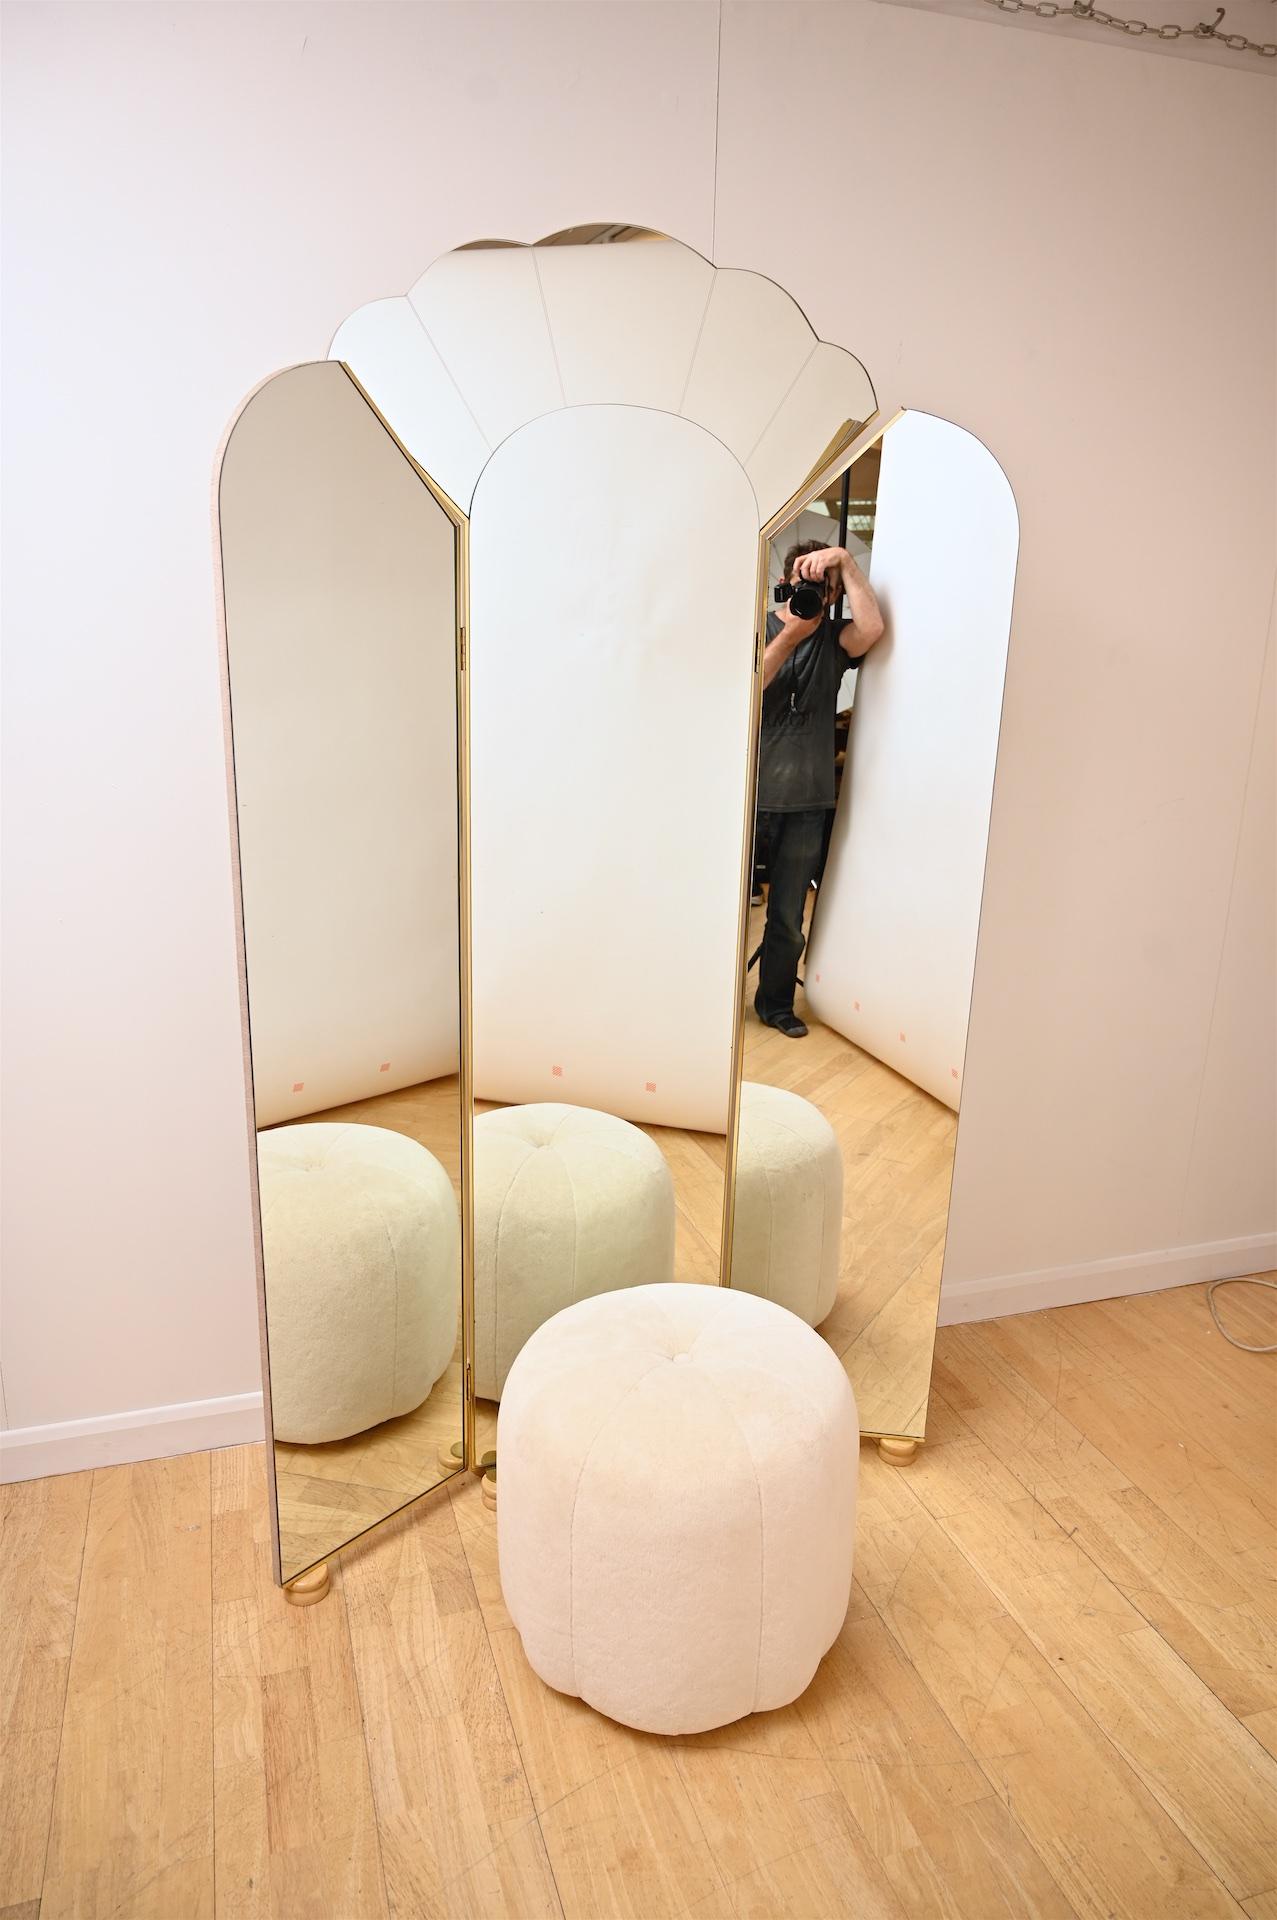 Late 20th Century Triptych Floor Standing Mirror C1970 by Alain Delon